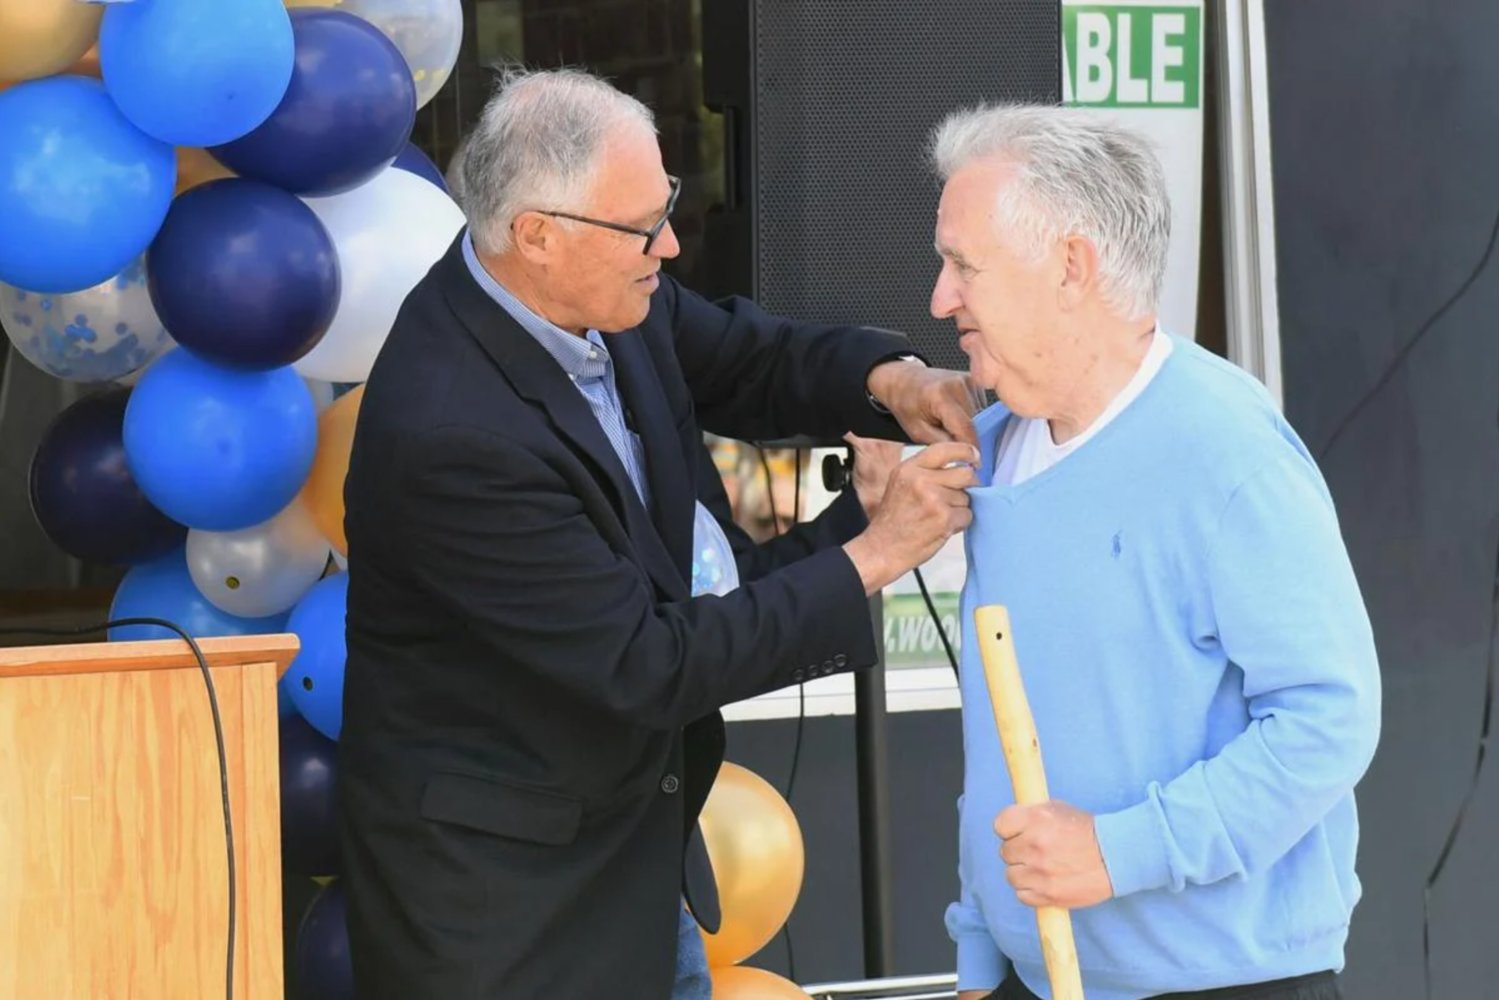 Washington Gov. Jay Inslee attaches an apple pin to Bill Ammons' shirt to honor him as "Washingtonian of the Day" at Bert and Bill Ammons' plaque dedication on Thursday, June 23 outside the family's old Pacific Barber Shop in Kelso. Inslee gave a speech at the ceremony honoring the father and son following an interview with The Daily News about the possibility of a state gas tax pause.